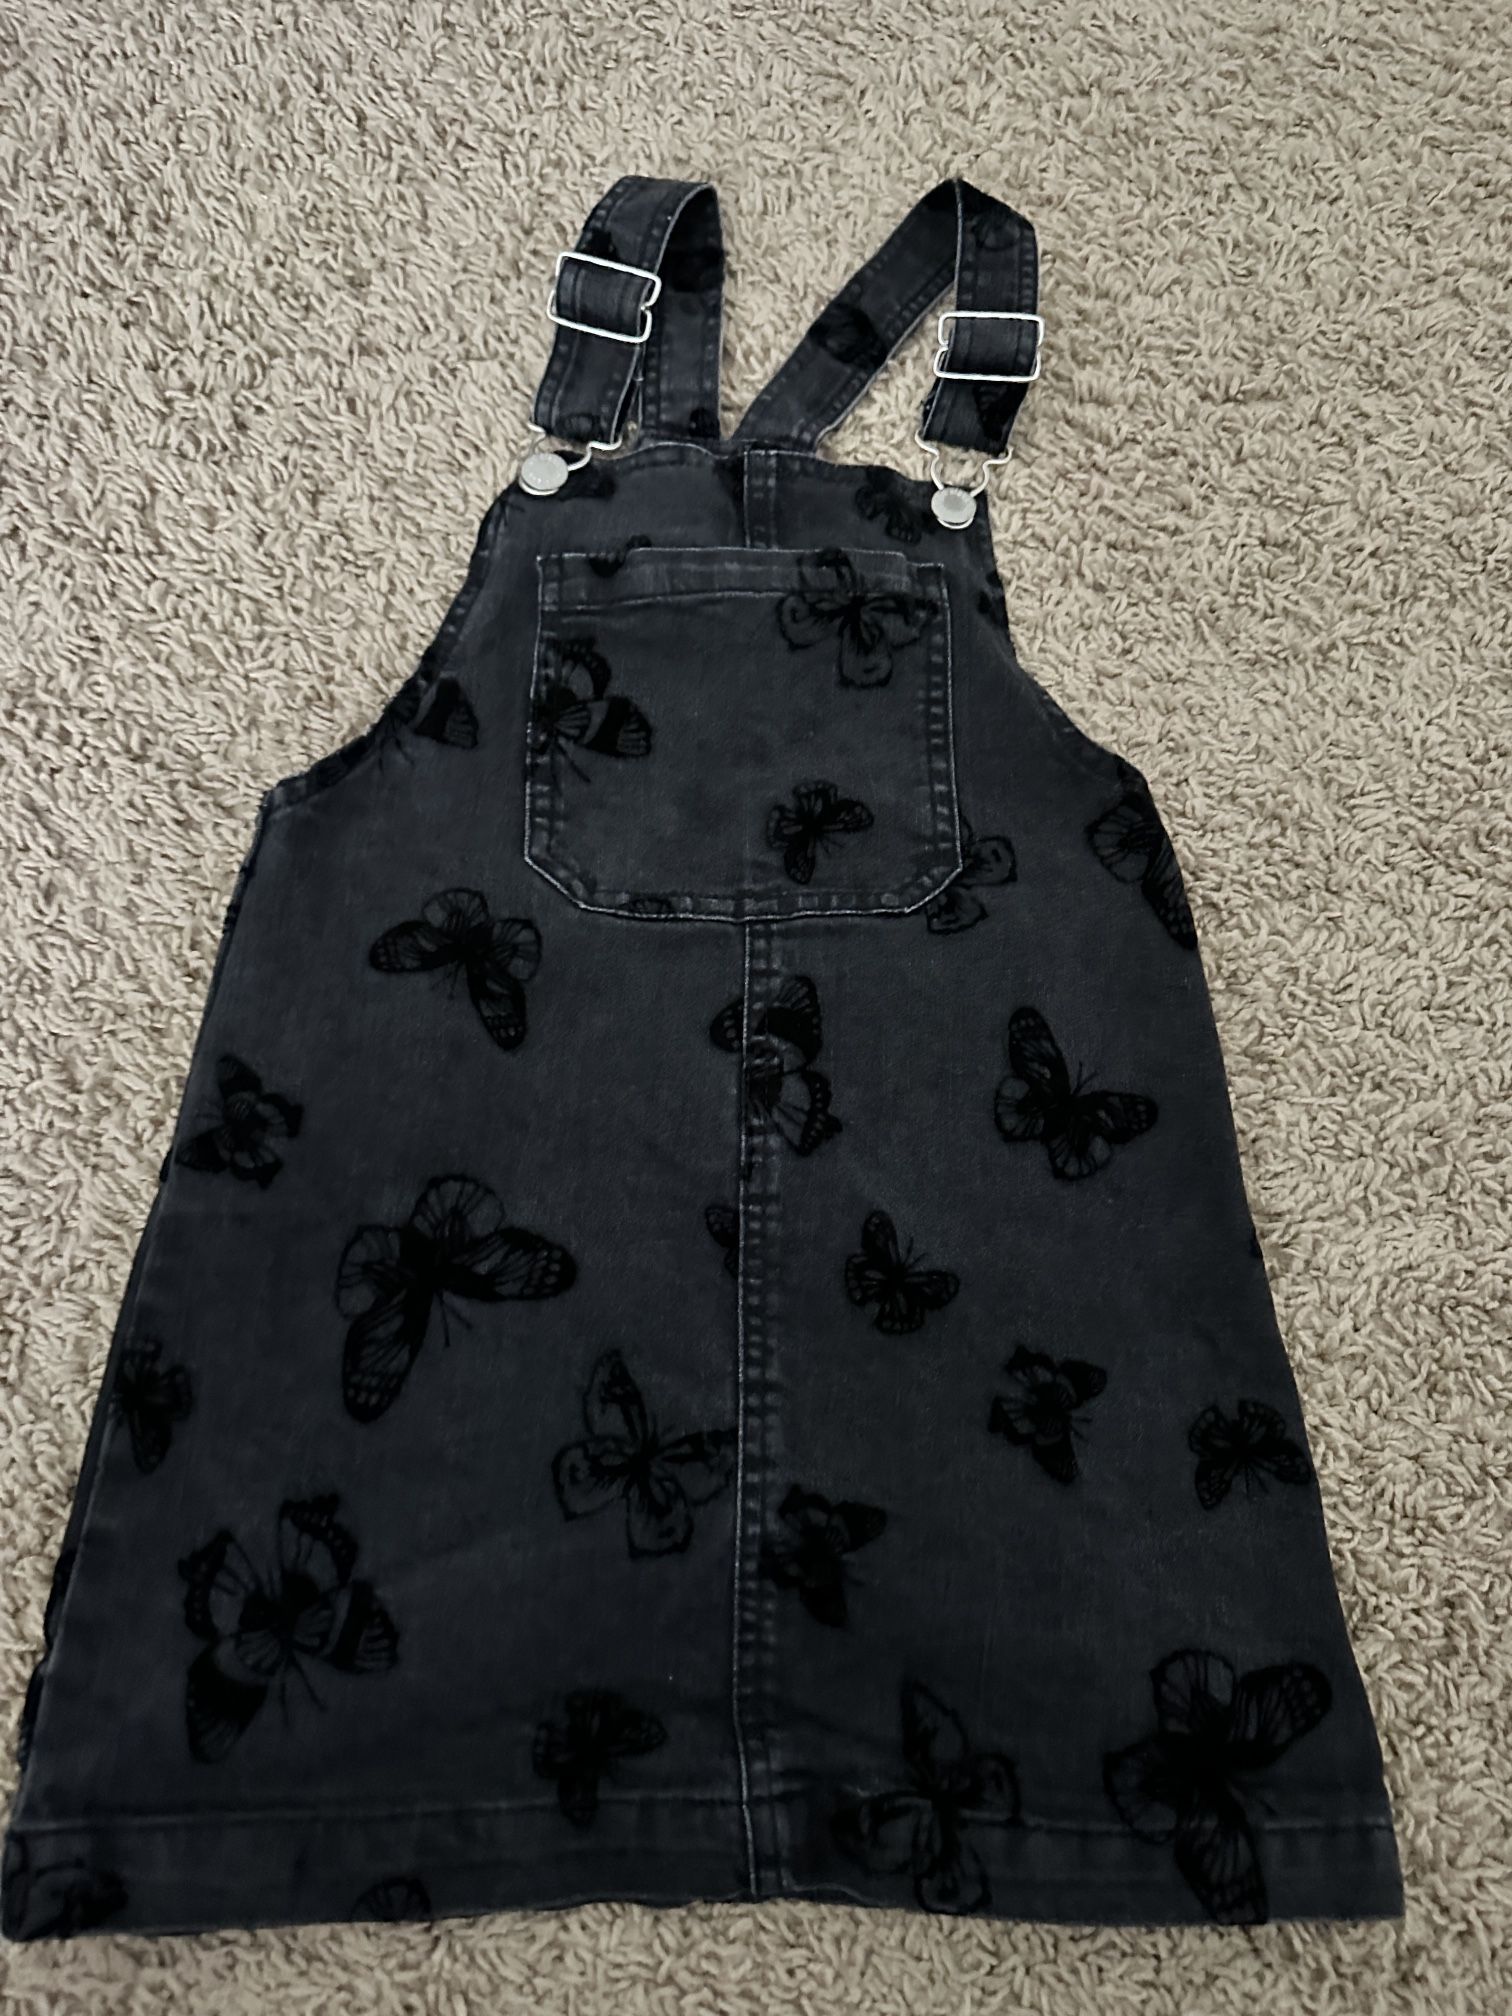 Back Jeans Overalls Dress Size 6t